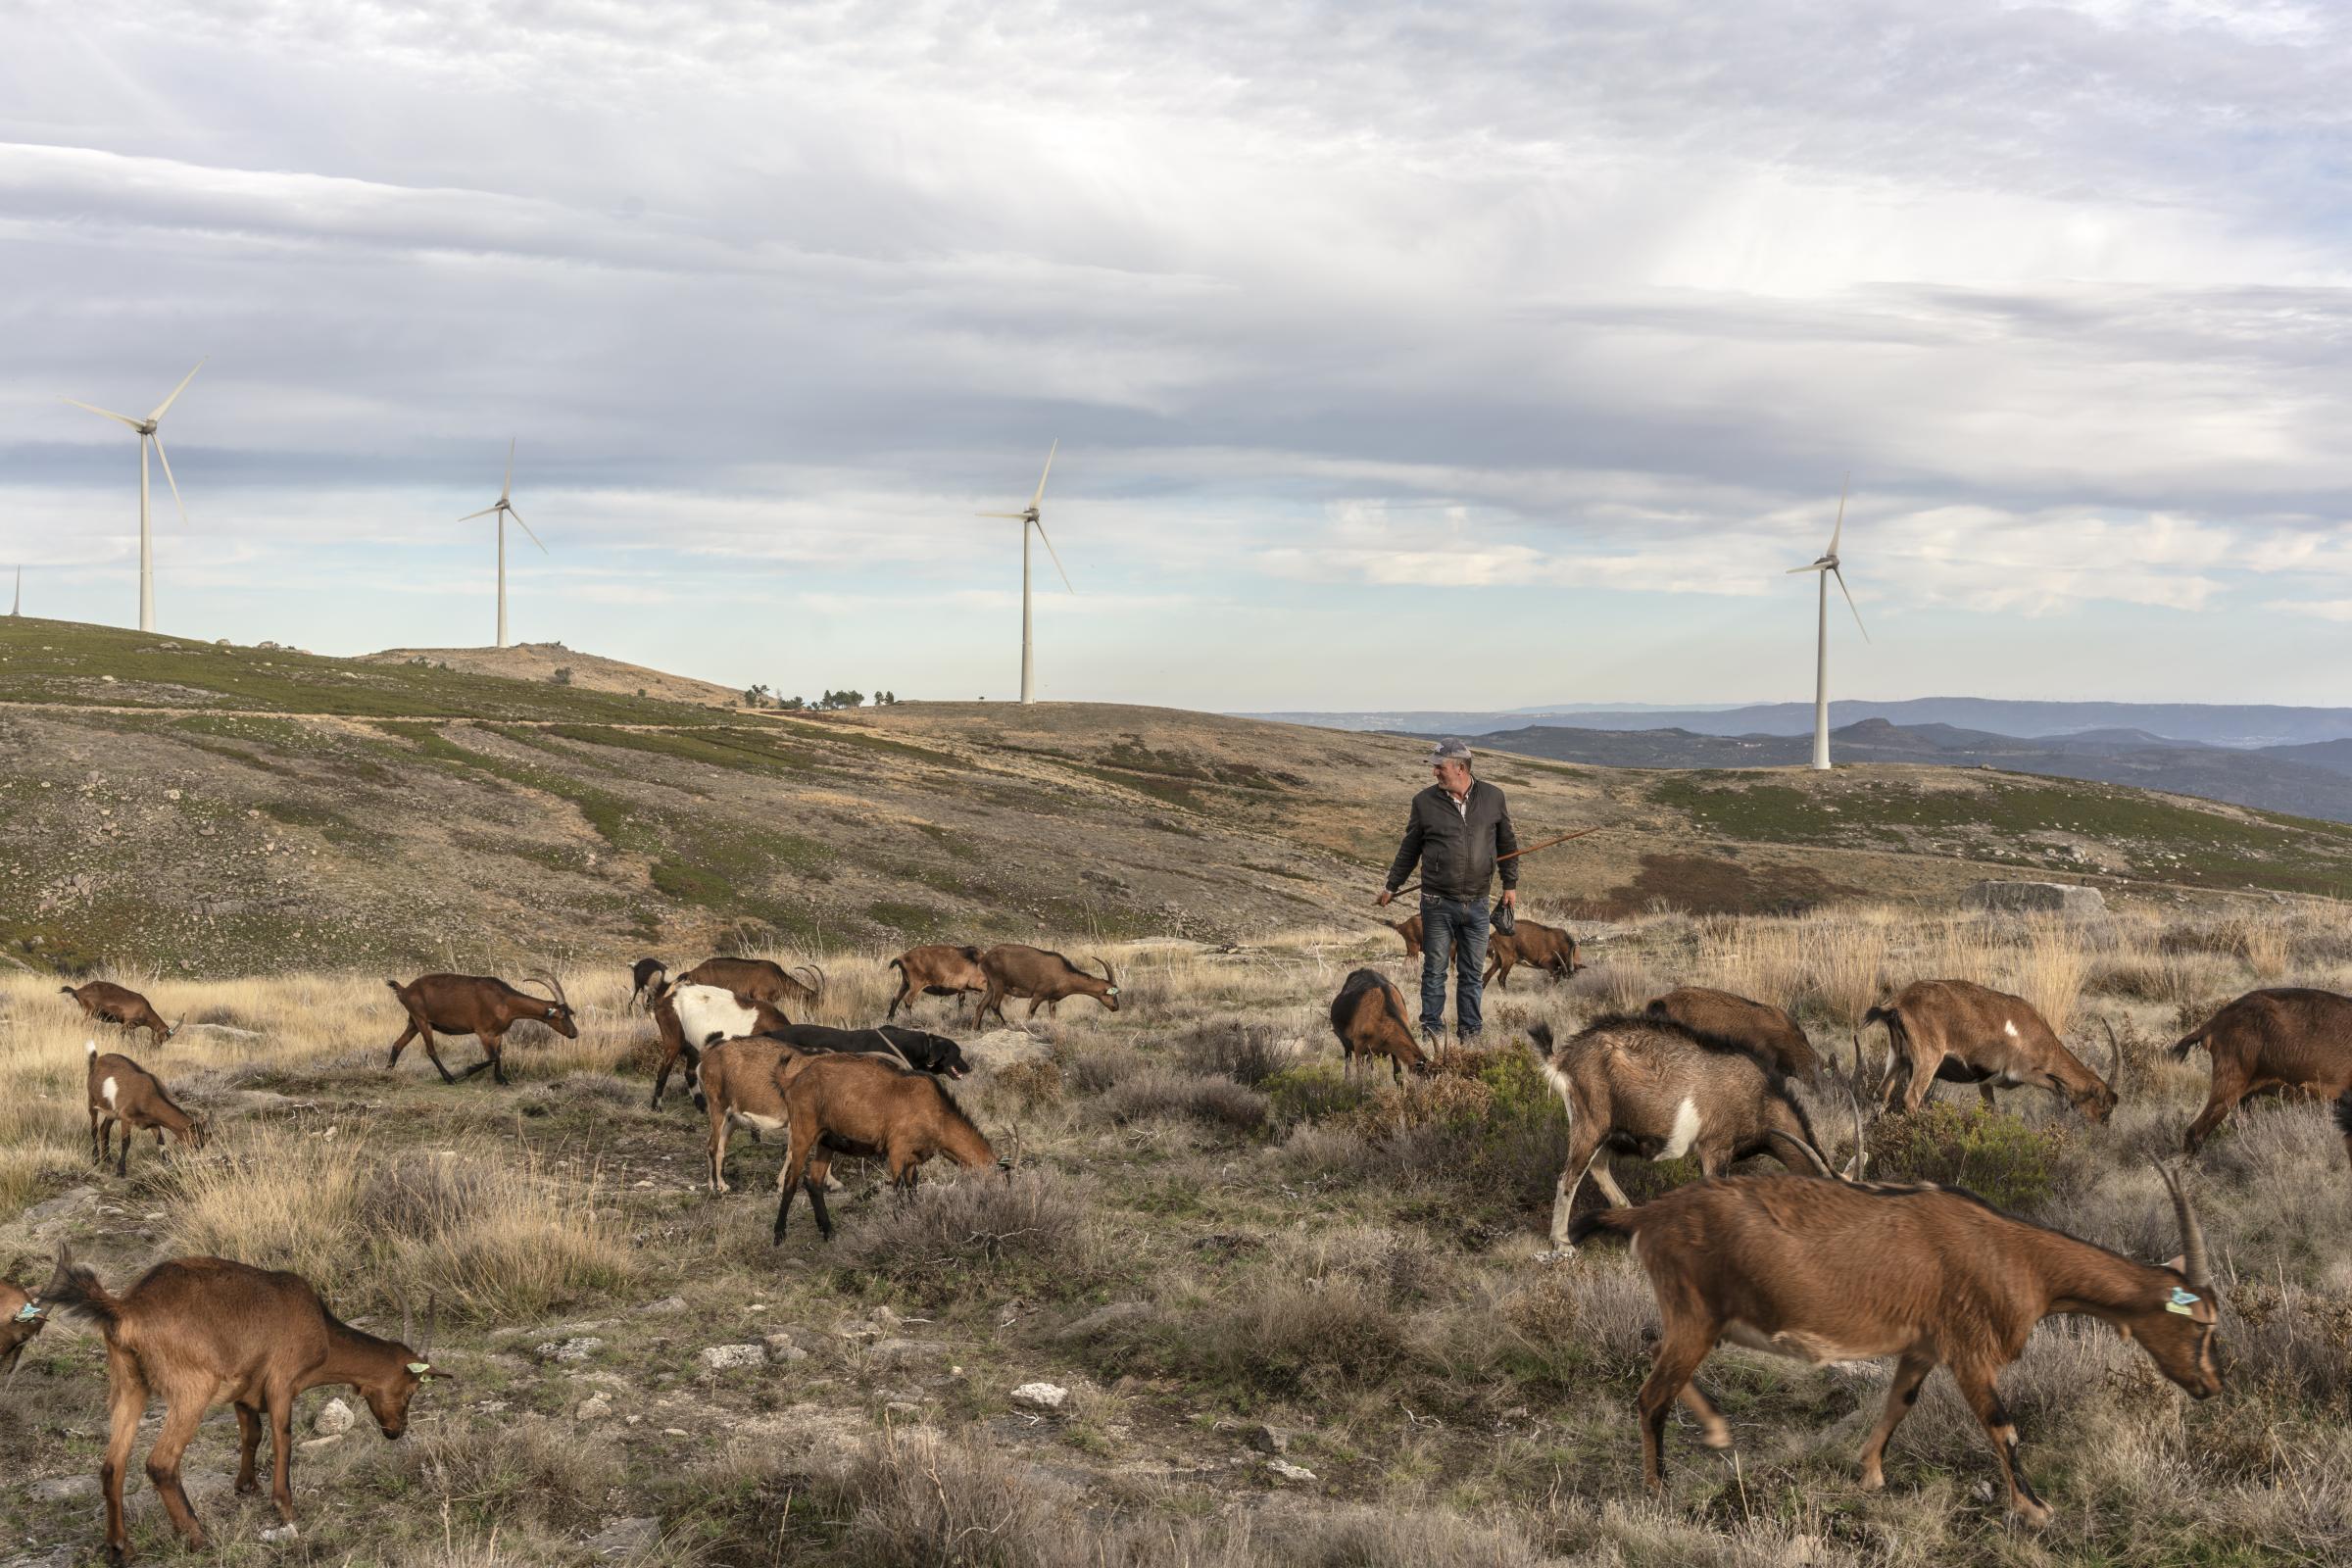 Cerdedo, October 23rd 2021 - Paulo das Cabras takes his 300 goats and sheep to graze among the wind turbines that dot the ridges of the hills of...